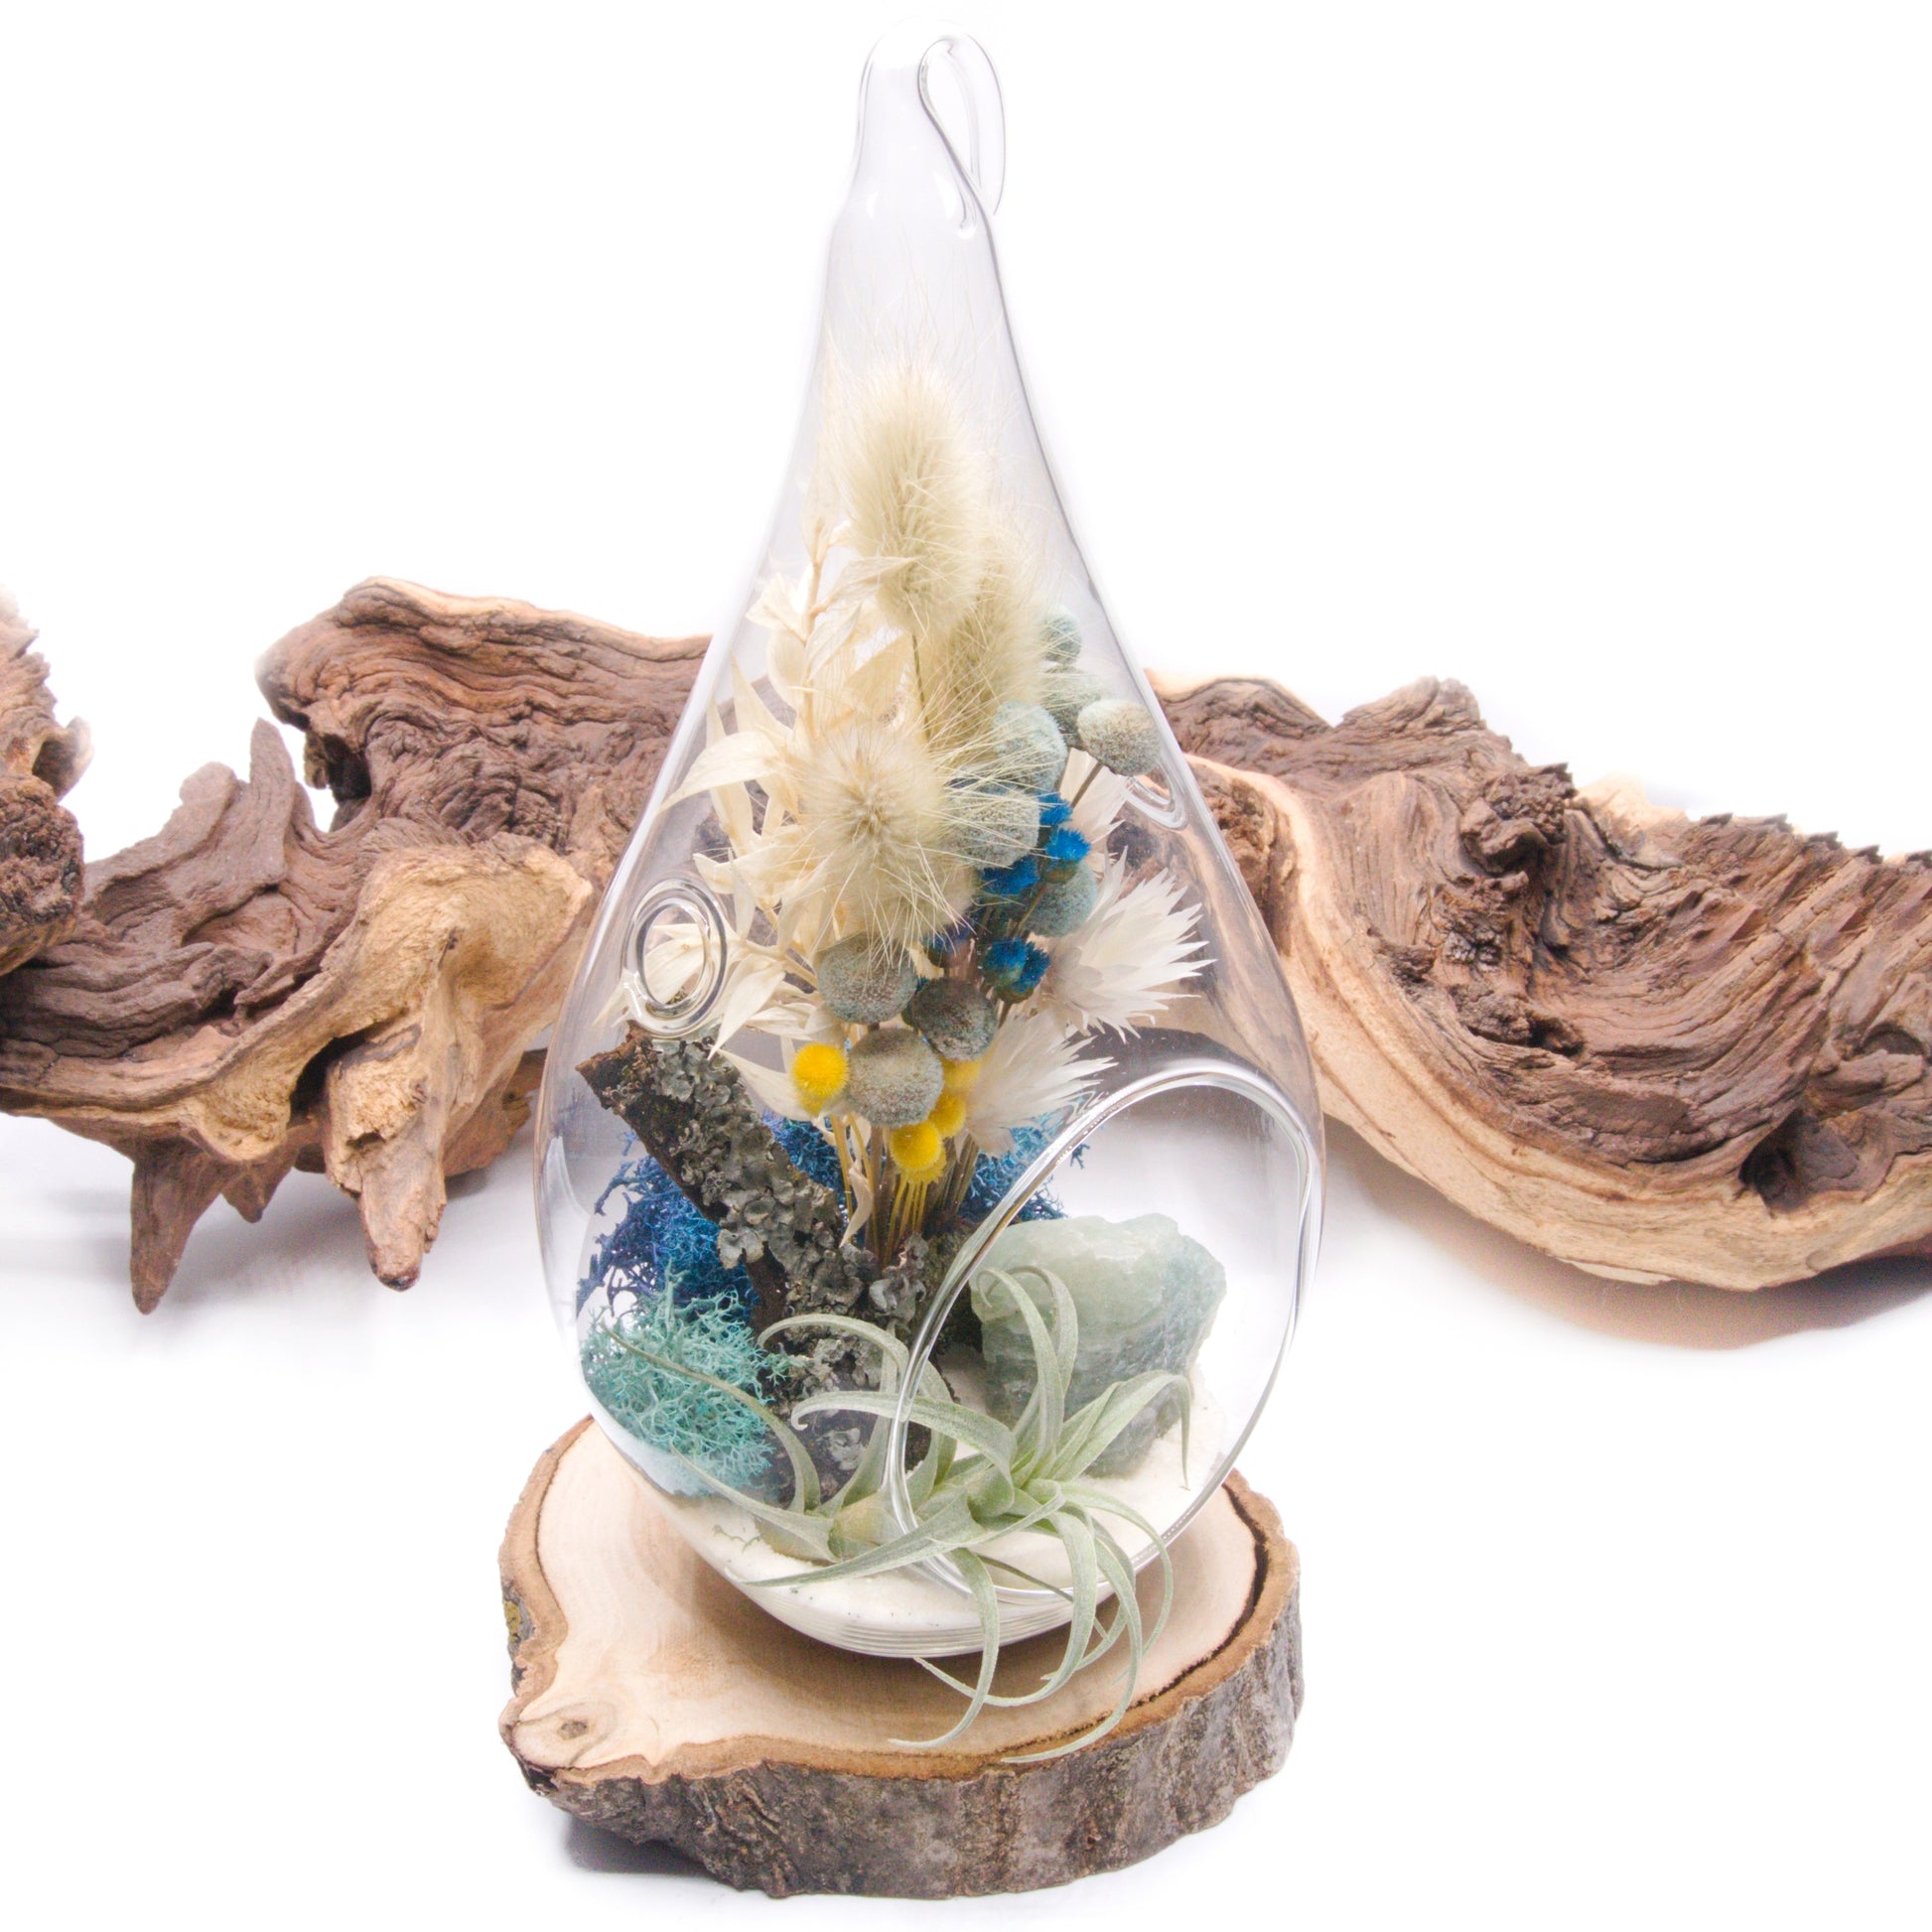 Glass tear-drop shaped airplant terrarium with a bouquet of dried flowers, moss, wood and an aquamarine crystal